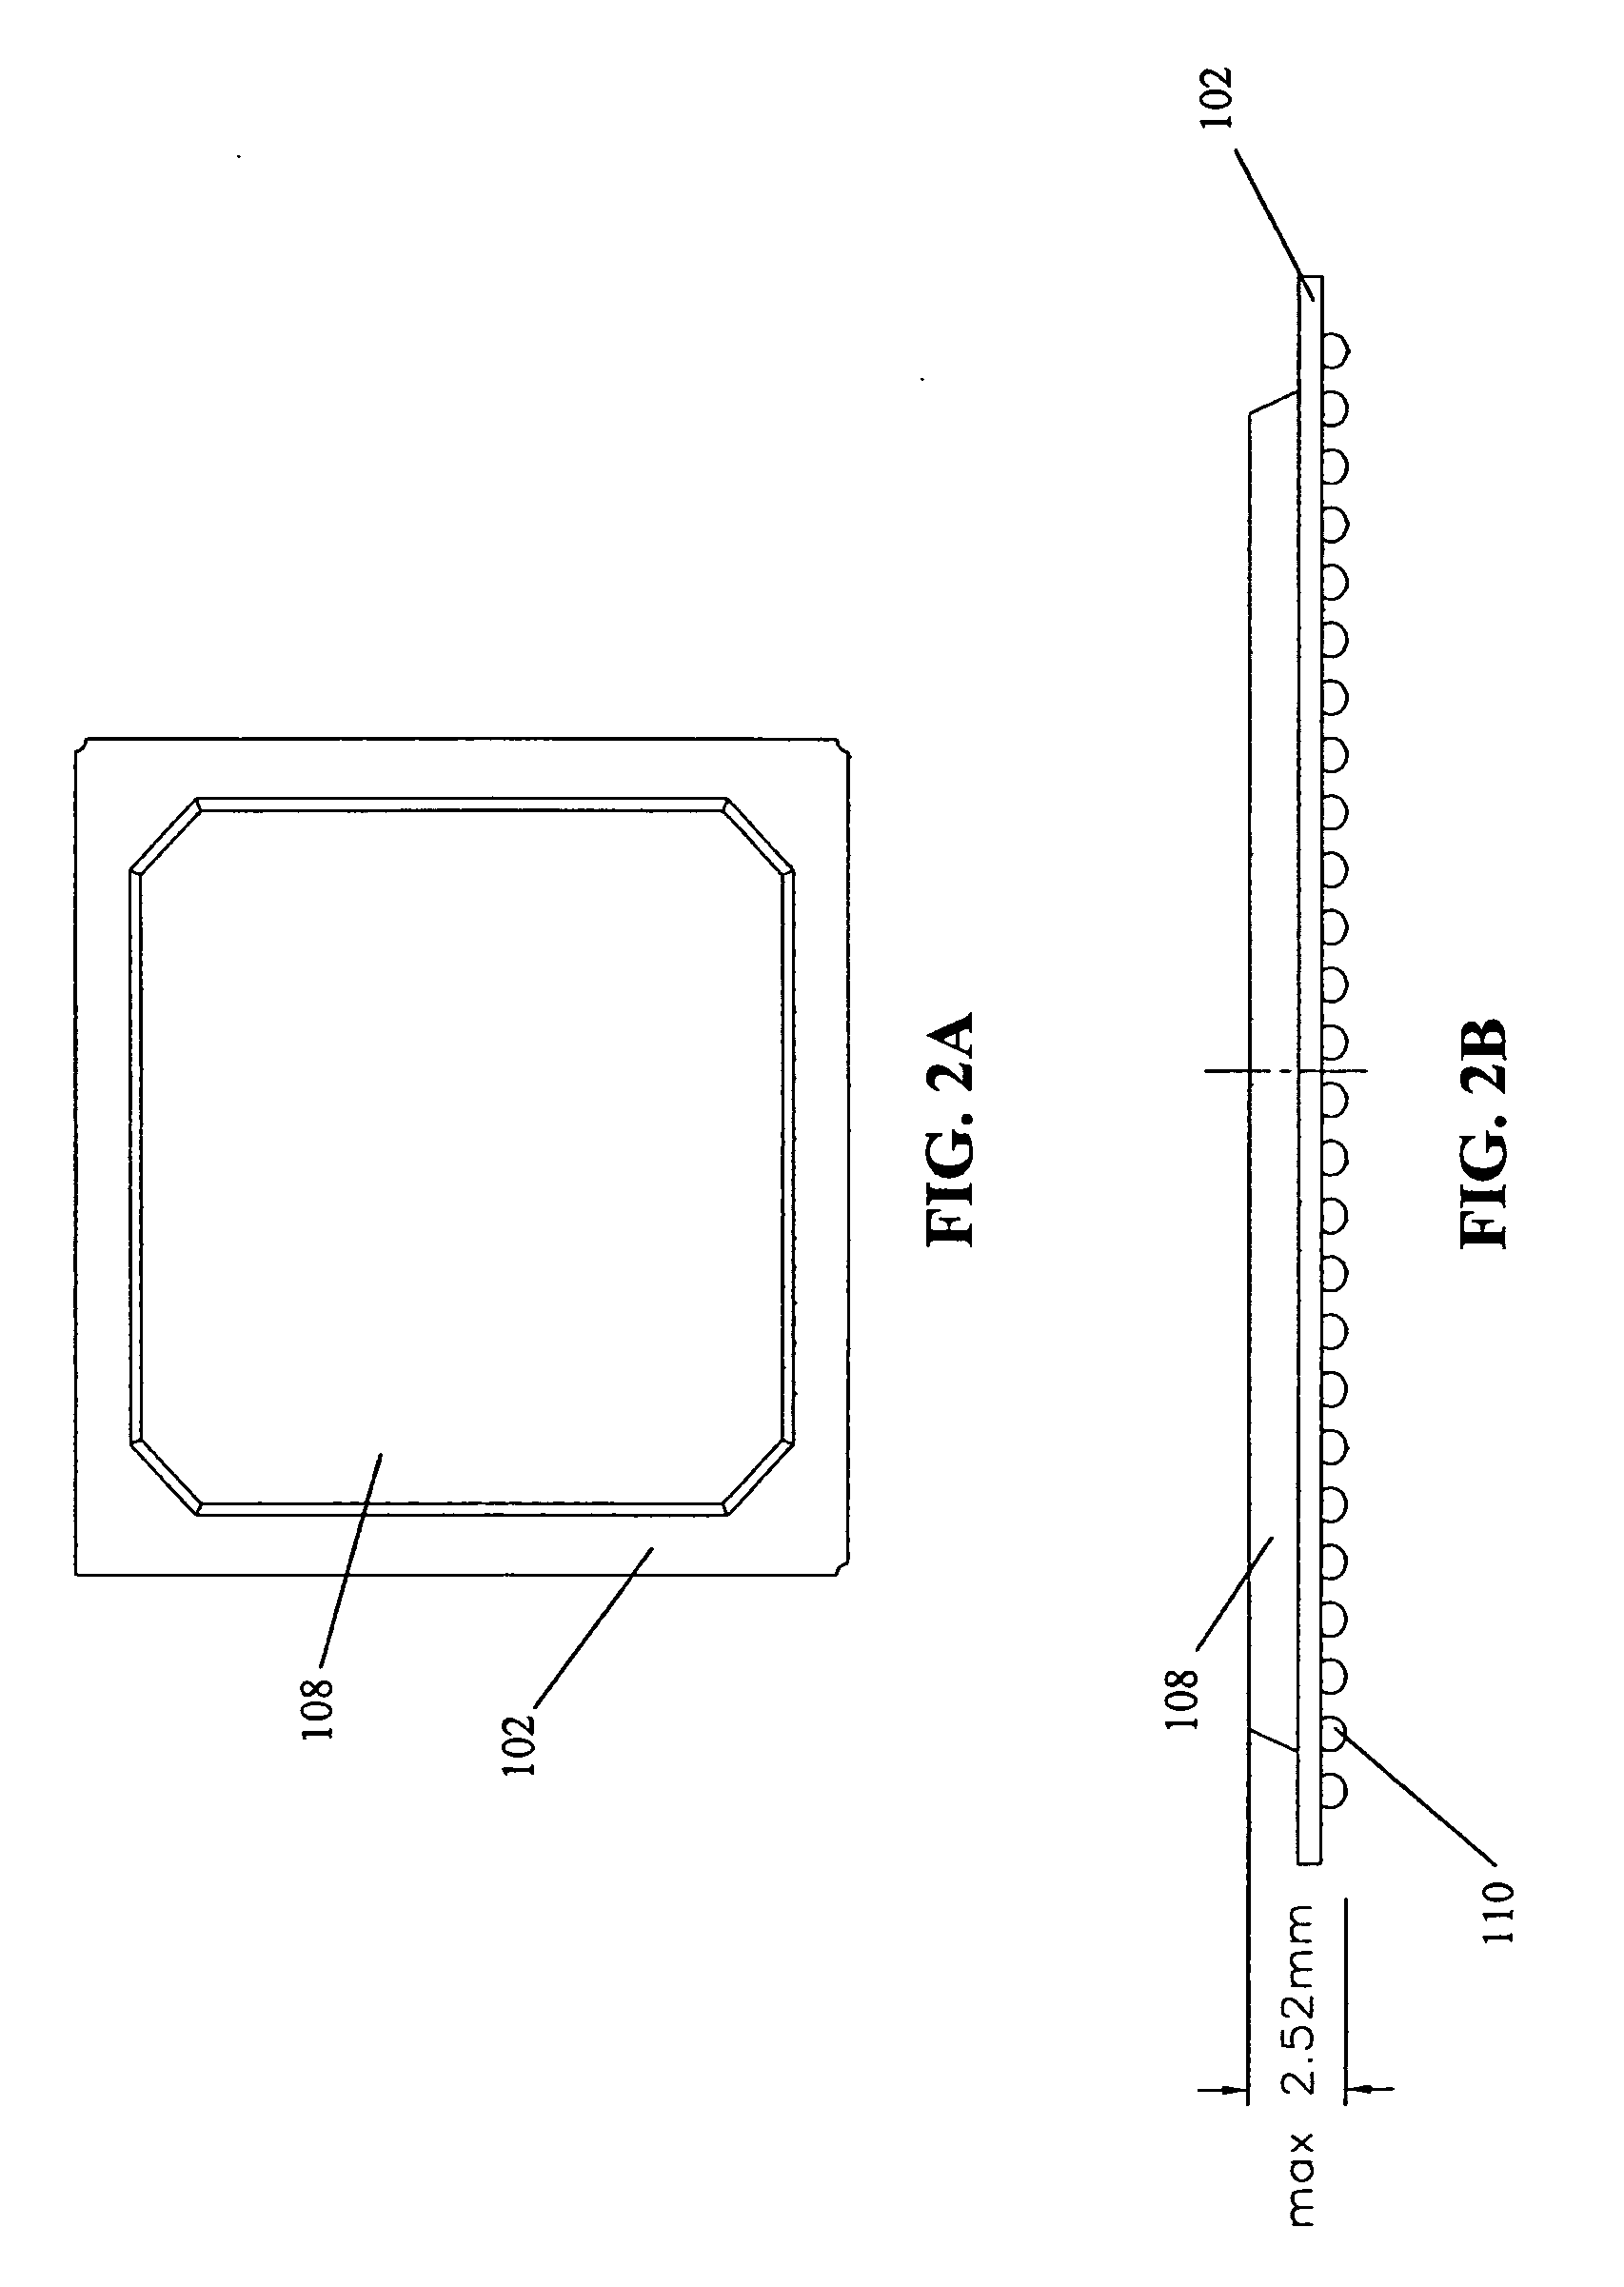 Interconnect structure and formation for package stacking of molded plastic area array package